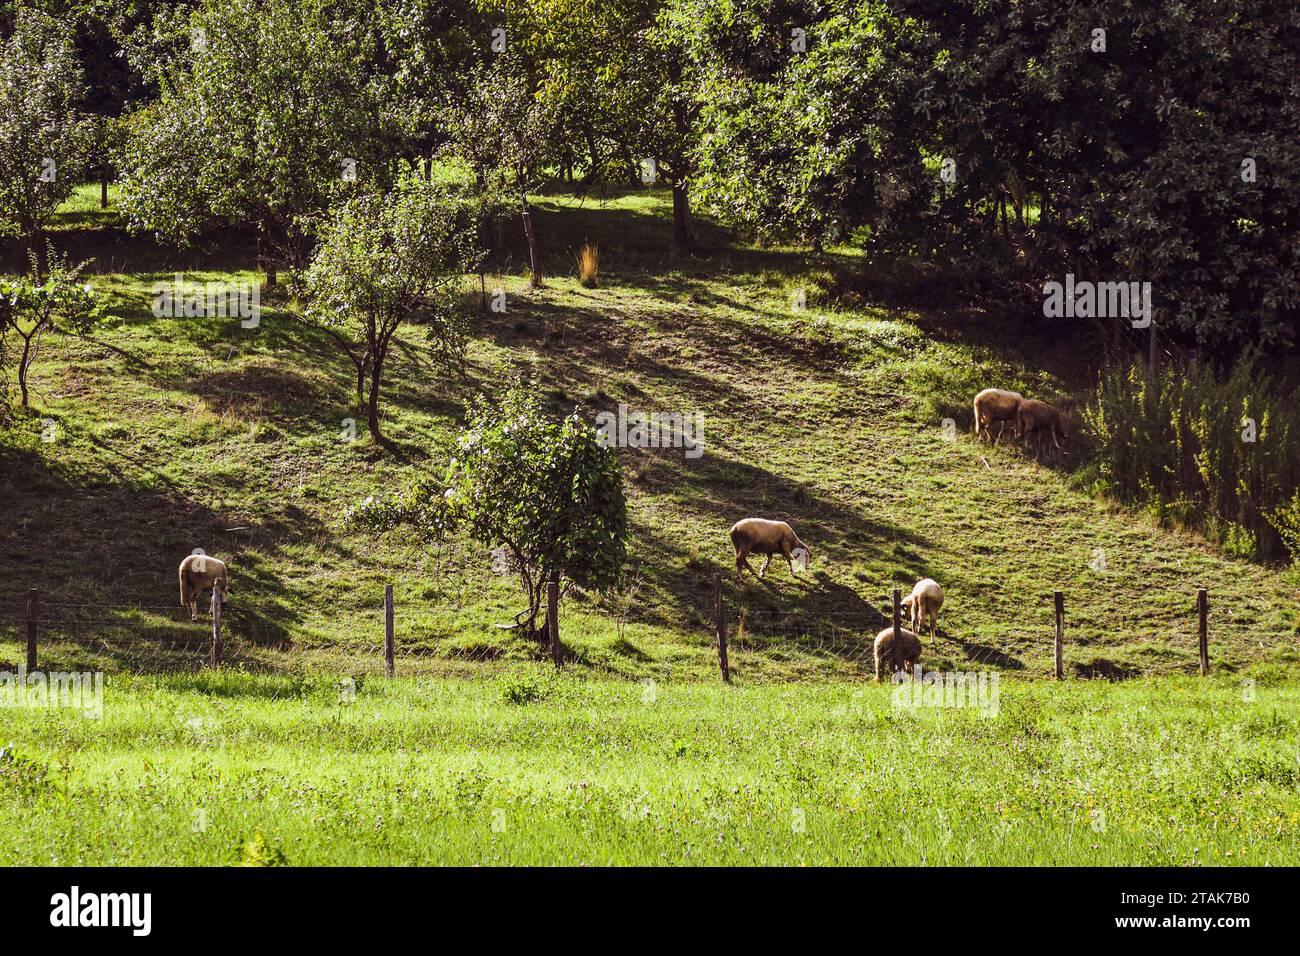 Sheep grazing. A green uncut meadow and a wire-fenced property behind the meadow Stock Photo